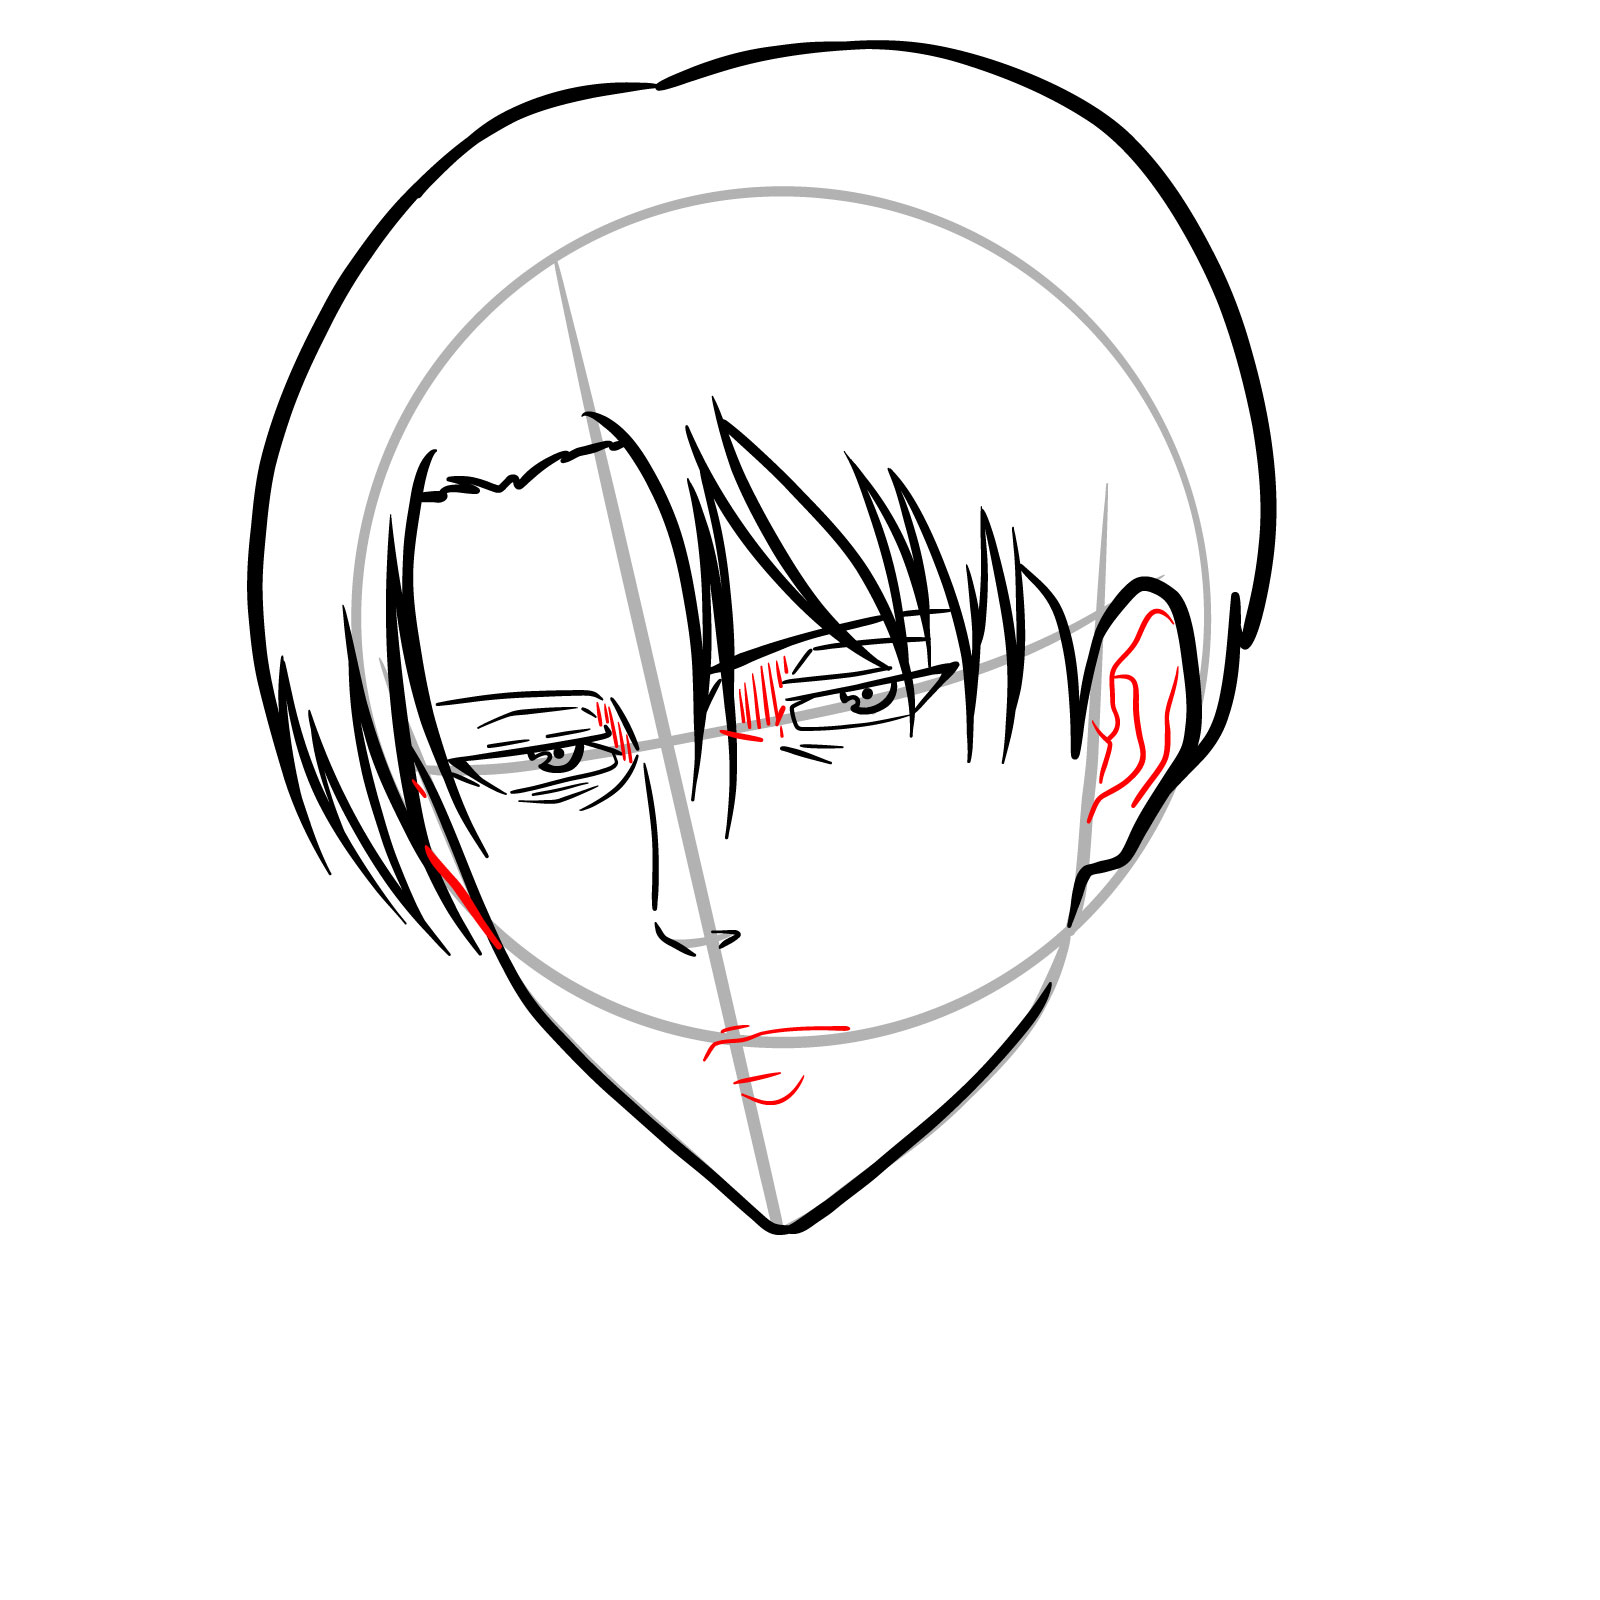 Mouth, ear details, and facial shading lines in Levi face drawing - step 11